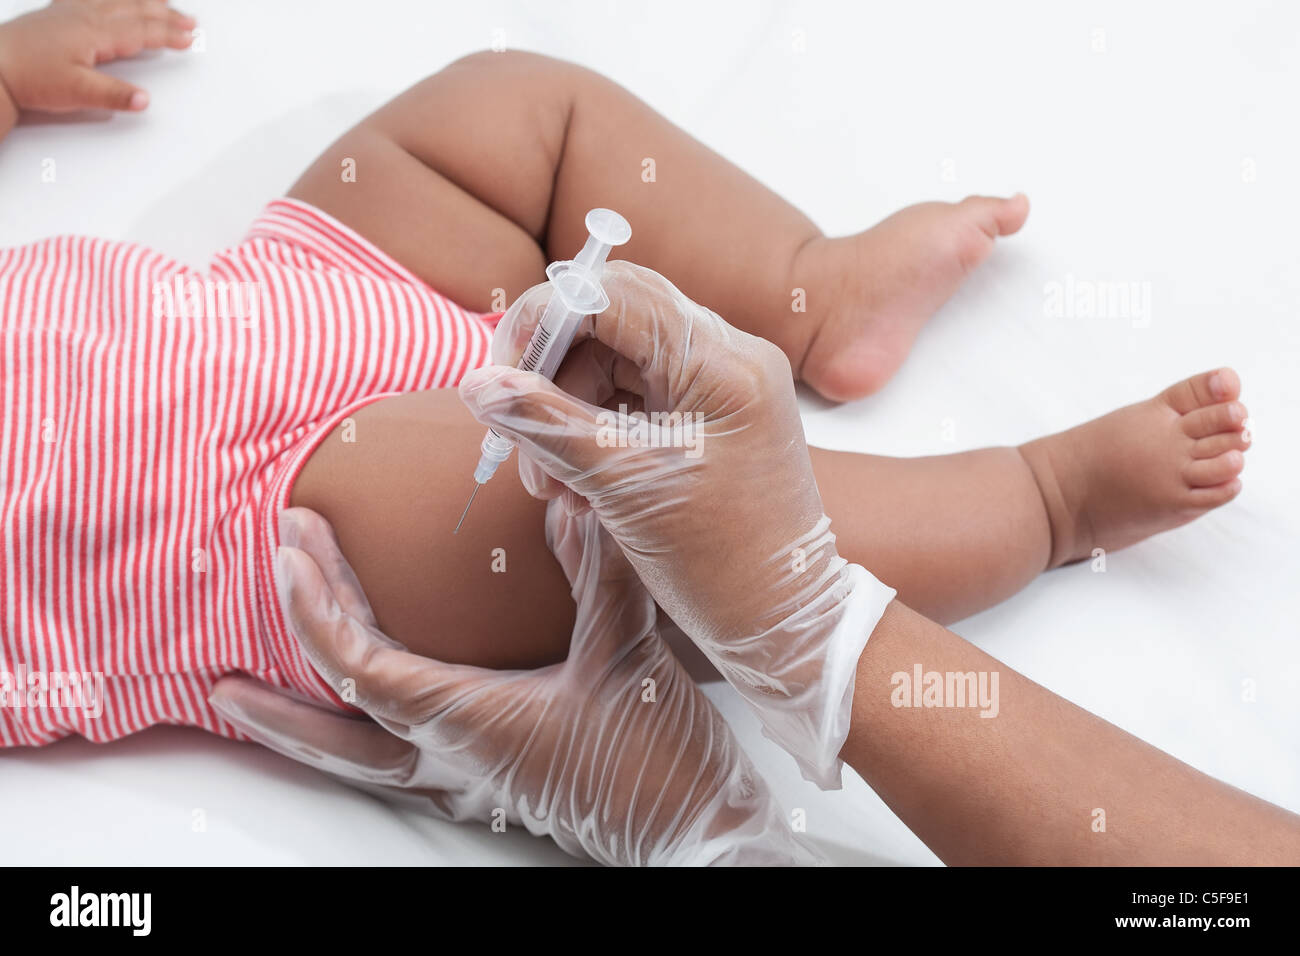 Nurse giving a baby a vaccine in the leg, latex free gloves Stock Photo